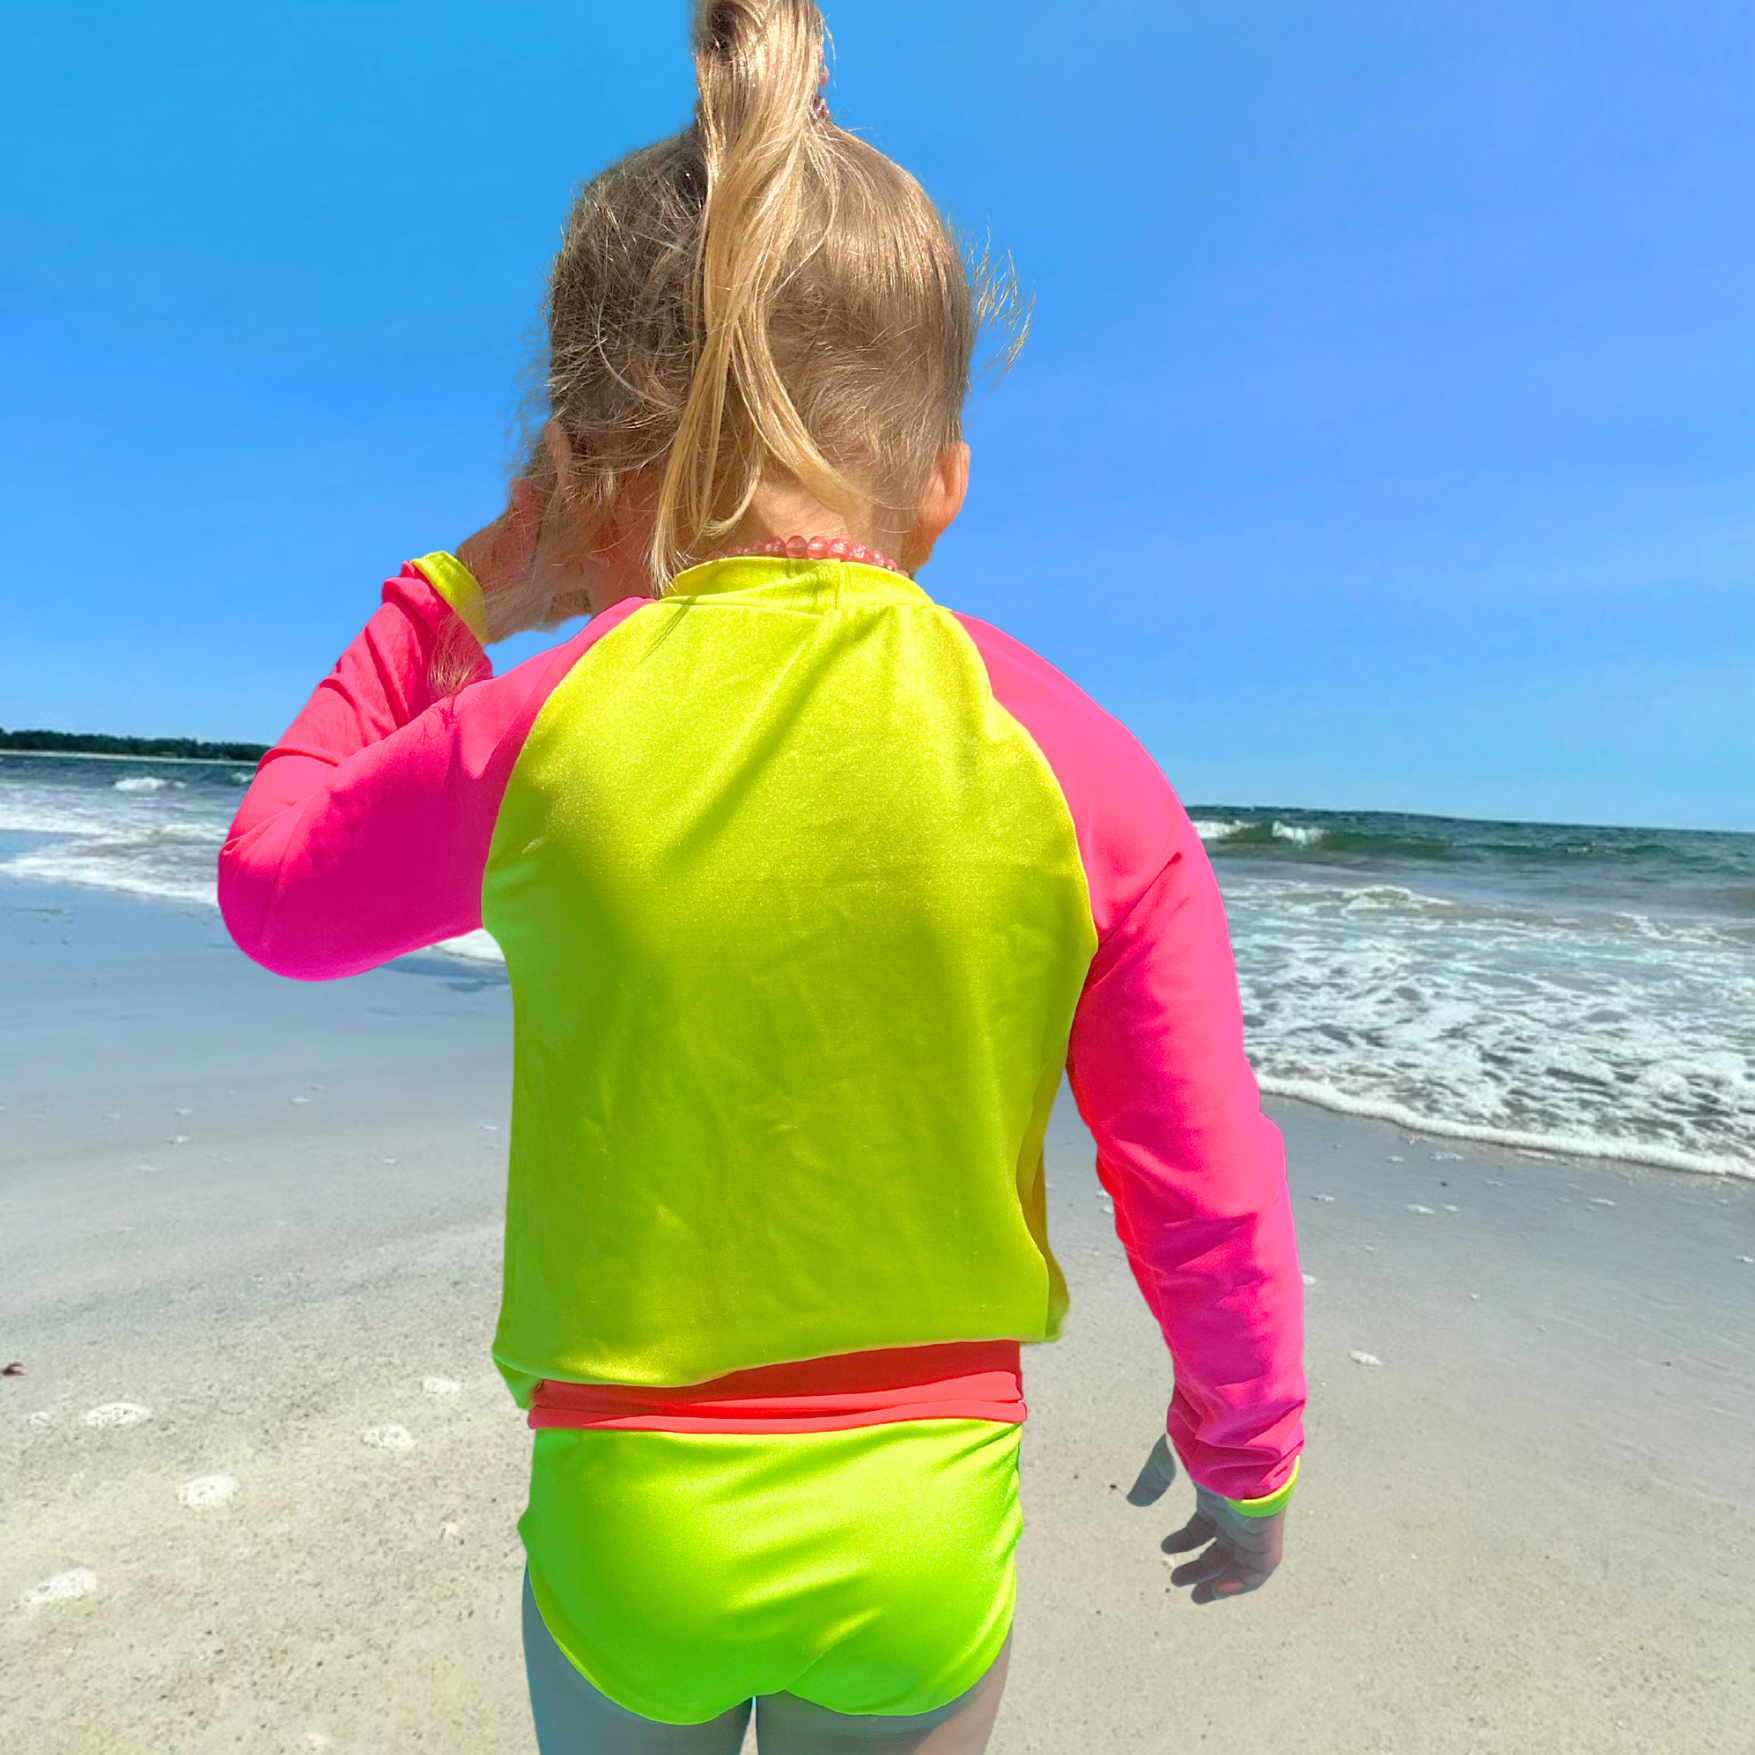 A preschooler standing on the beach back to the camera and facing the water. She is wearing a neon yellow rash guard with neon pink sleeves. She also has on neon swim bottoms from a neon bikin set with a neon pink waistband. She has one hand up on her face and the other by her side. 